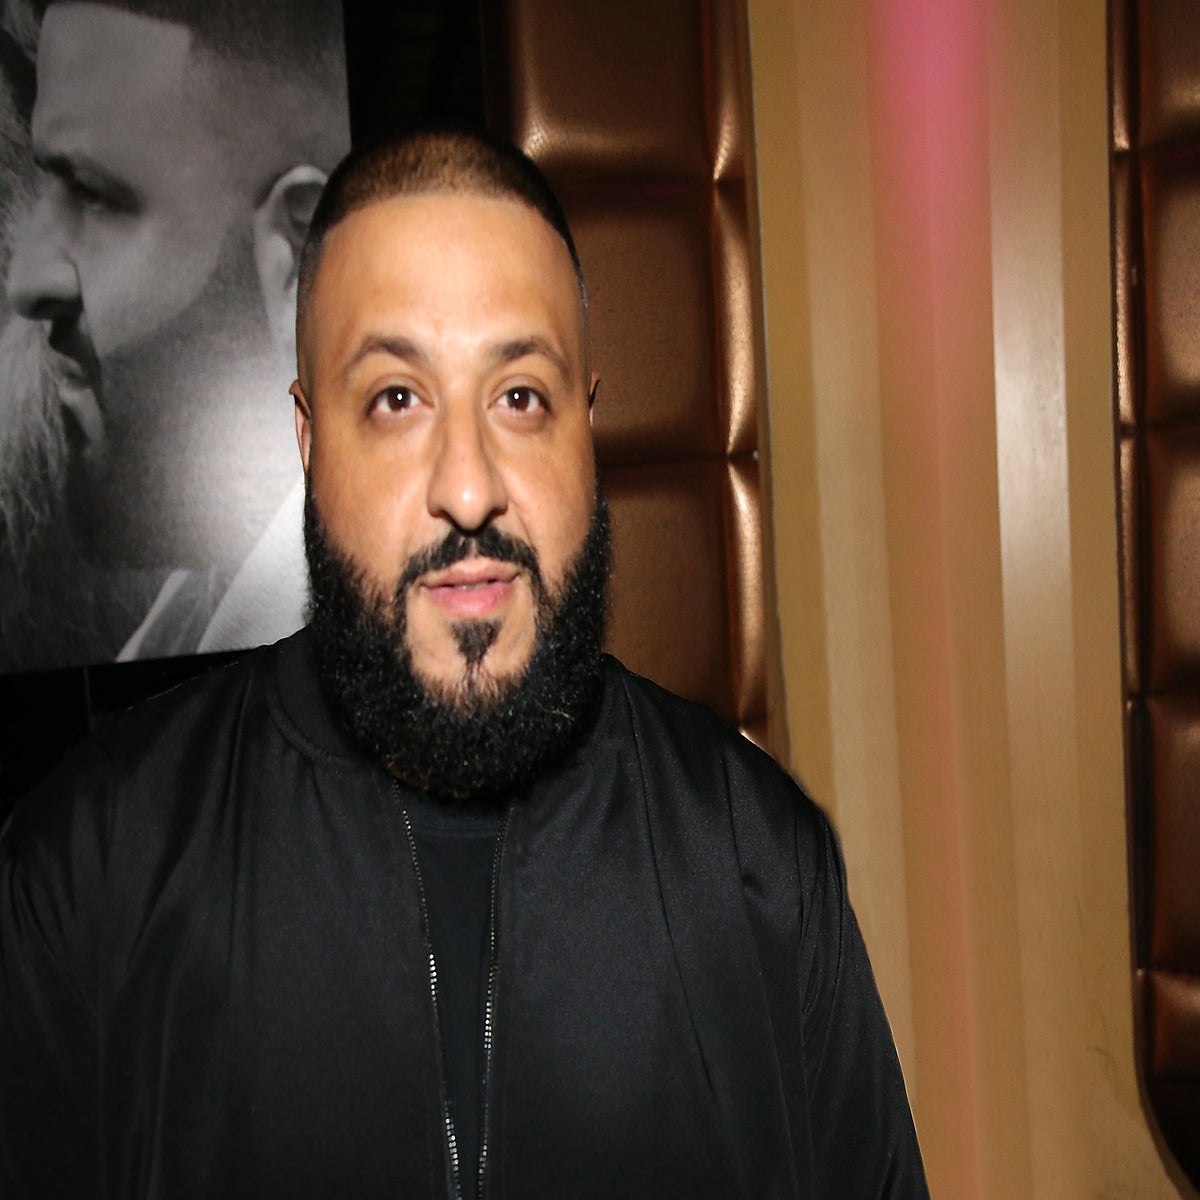 Chaled Ki Cut Xxx - DJ Khaled said he does not perform oral sex on women because 'there are  different rules for men' | The Independent | The Independent